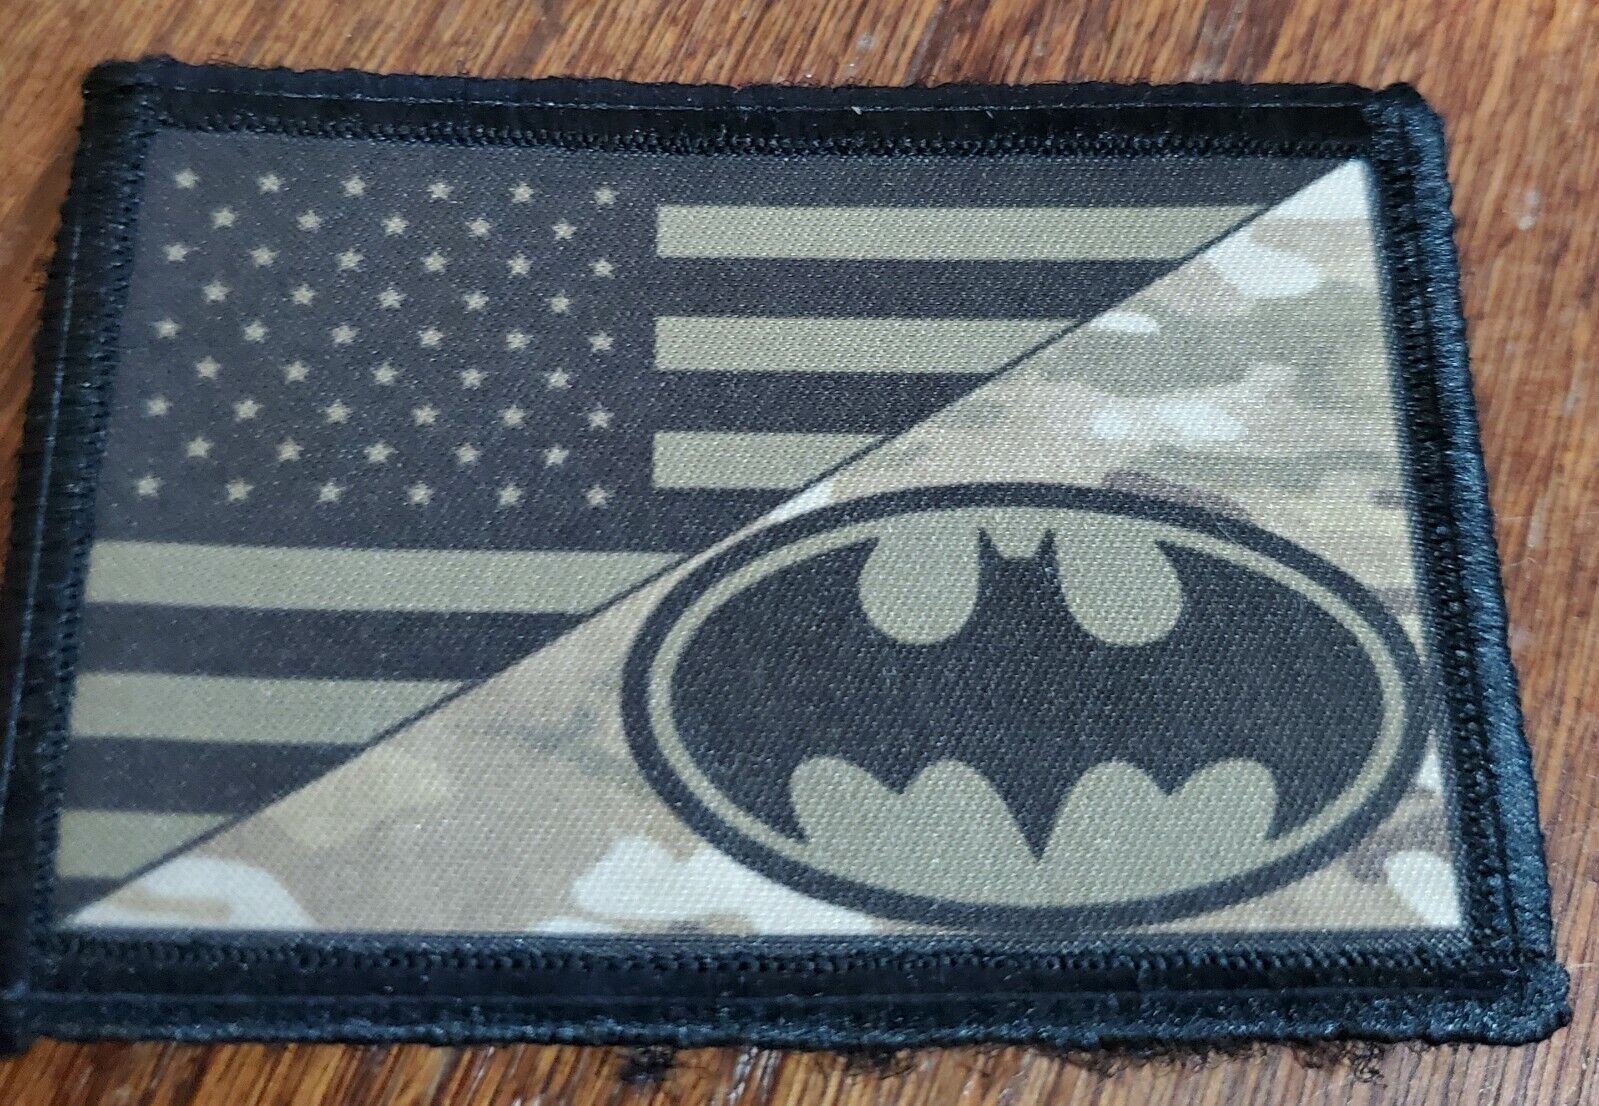 Subdued Batman USA Flag Multicam  Morale Patch  Tactical Military USA Army hook